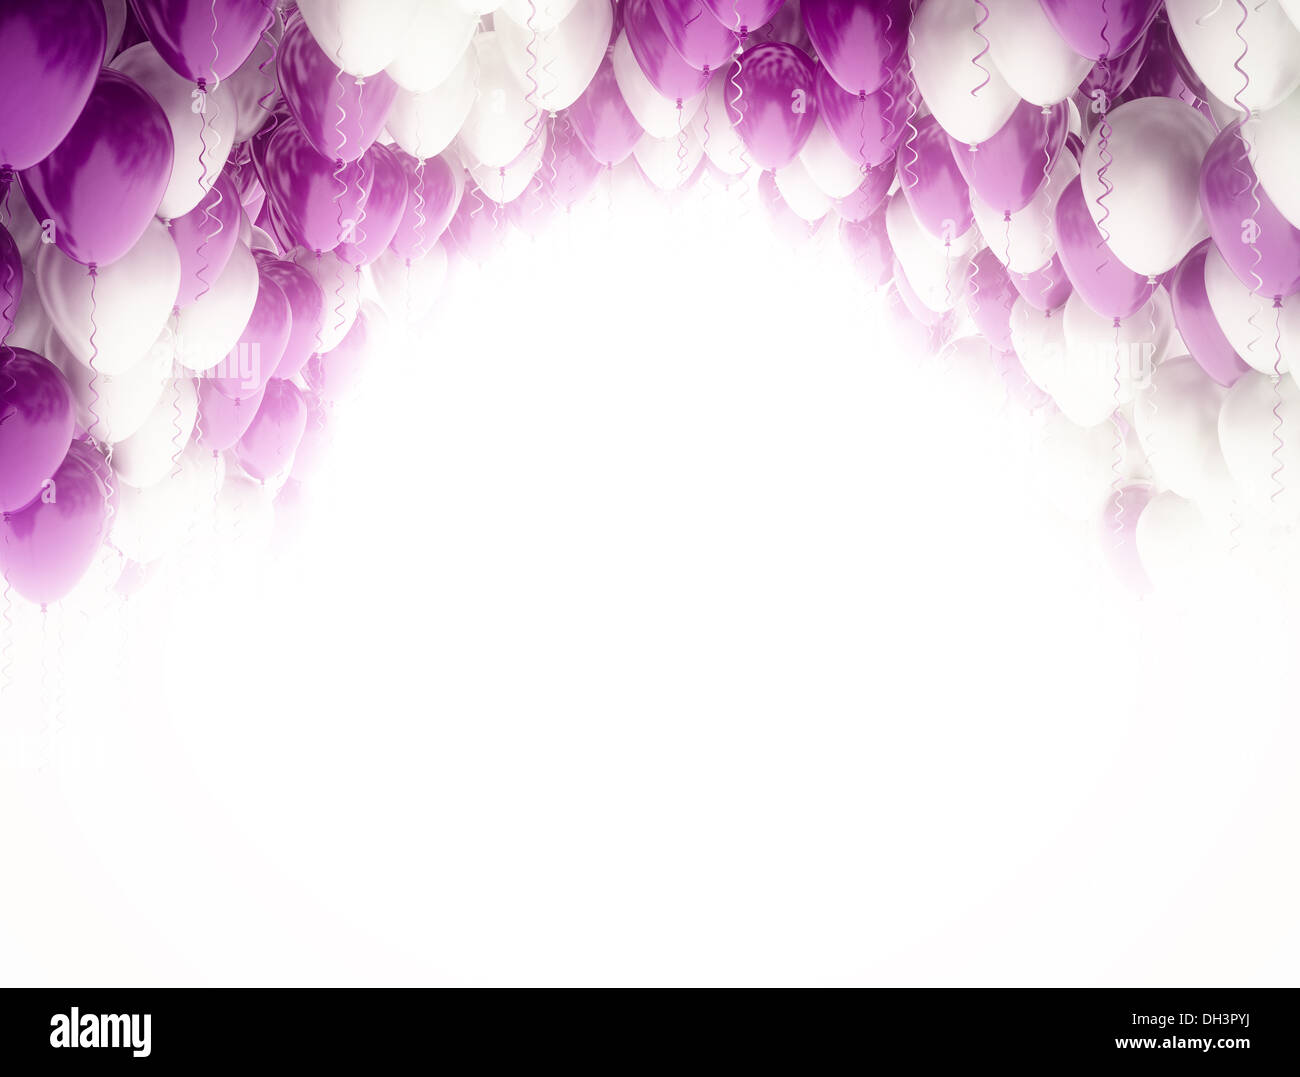 Celebration background with purple and white balloons isolated on white  Stock Photo - Alamy